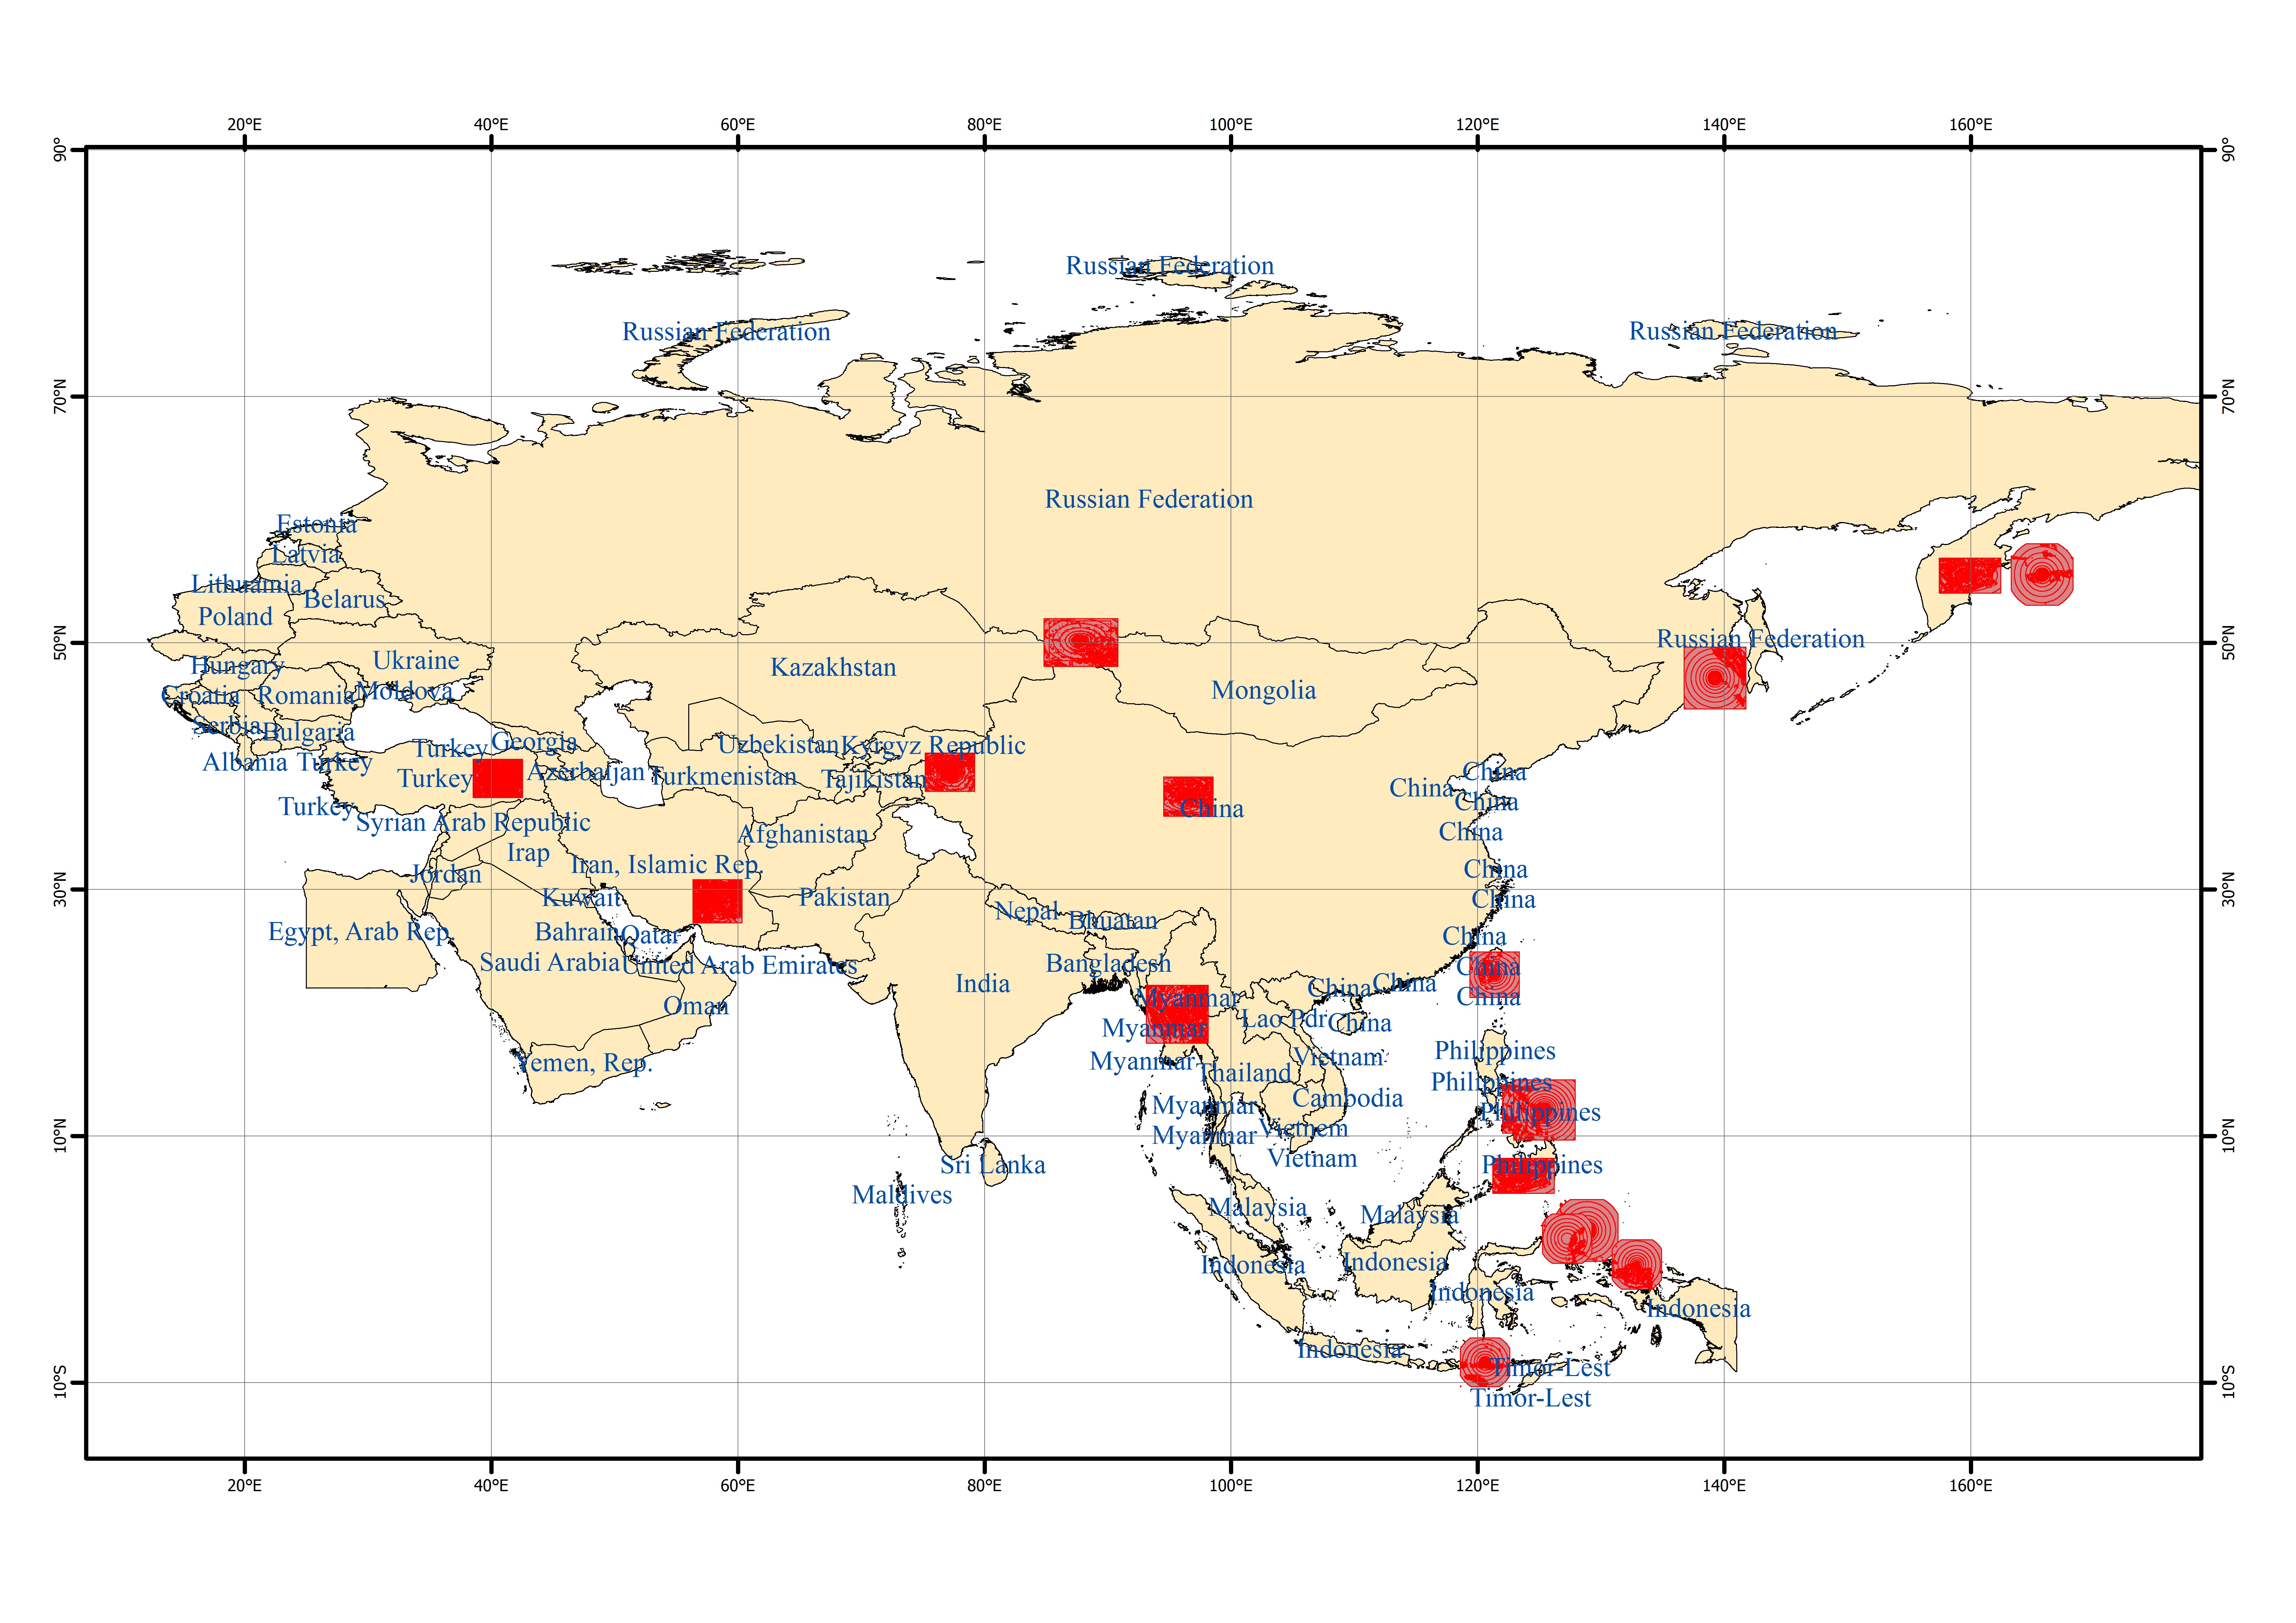 Spatio-temporal Distribution of Earthquake Disaster in the Belt and Road Area of 2003